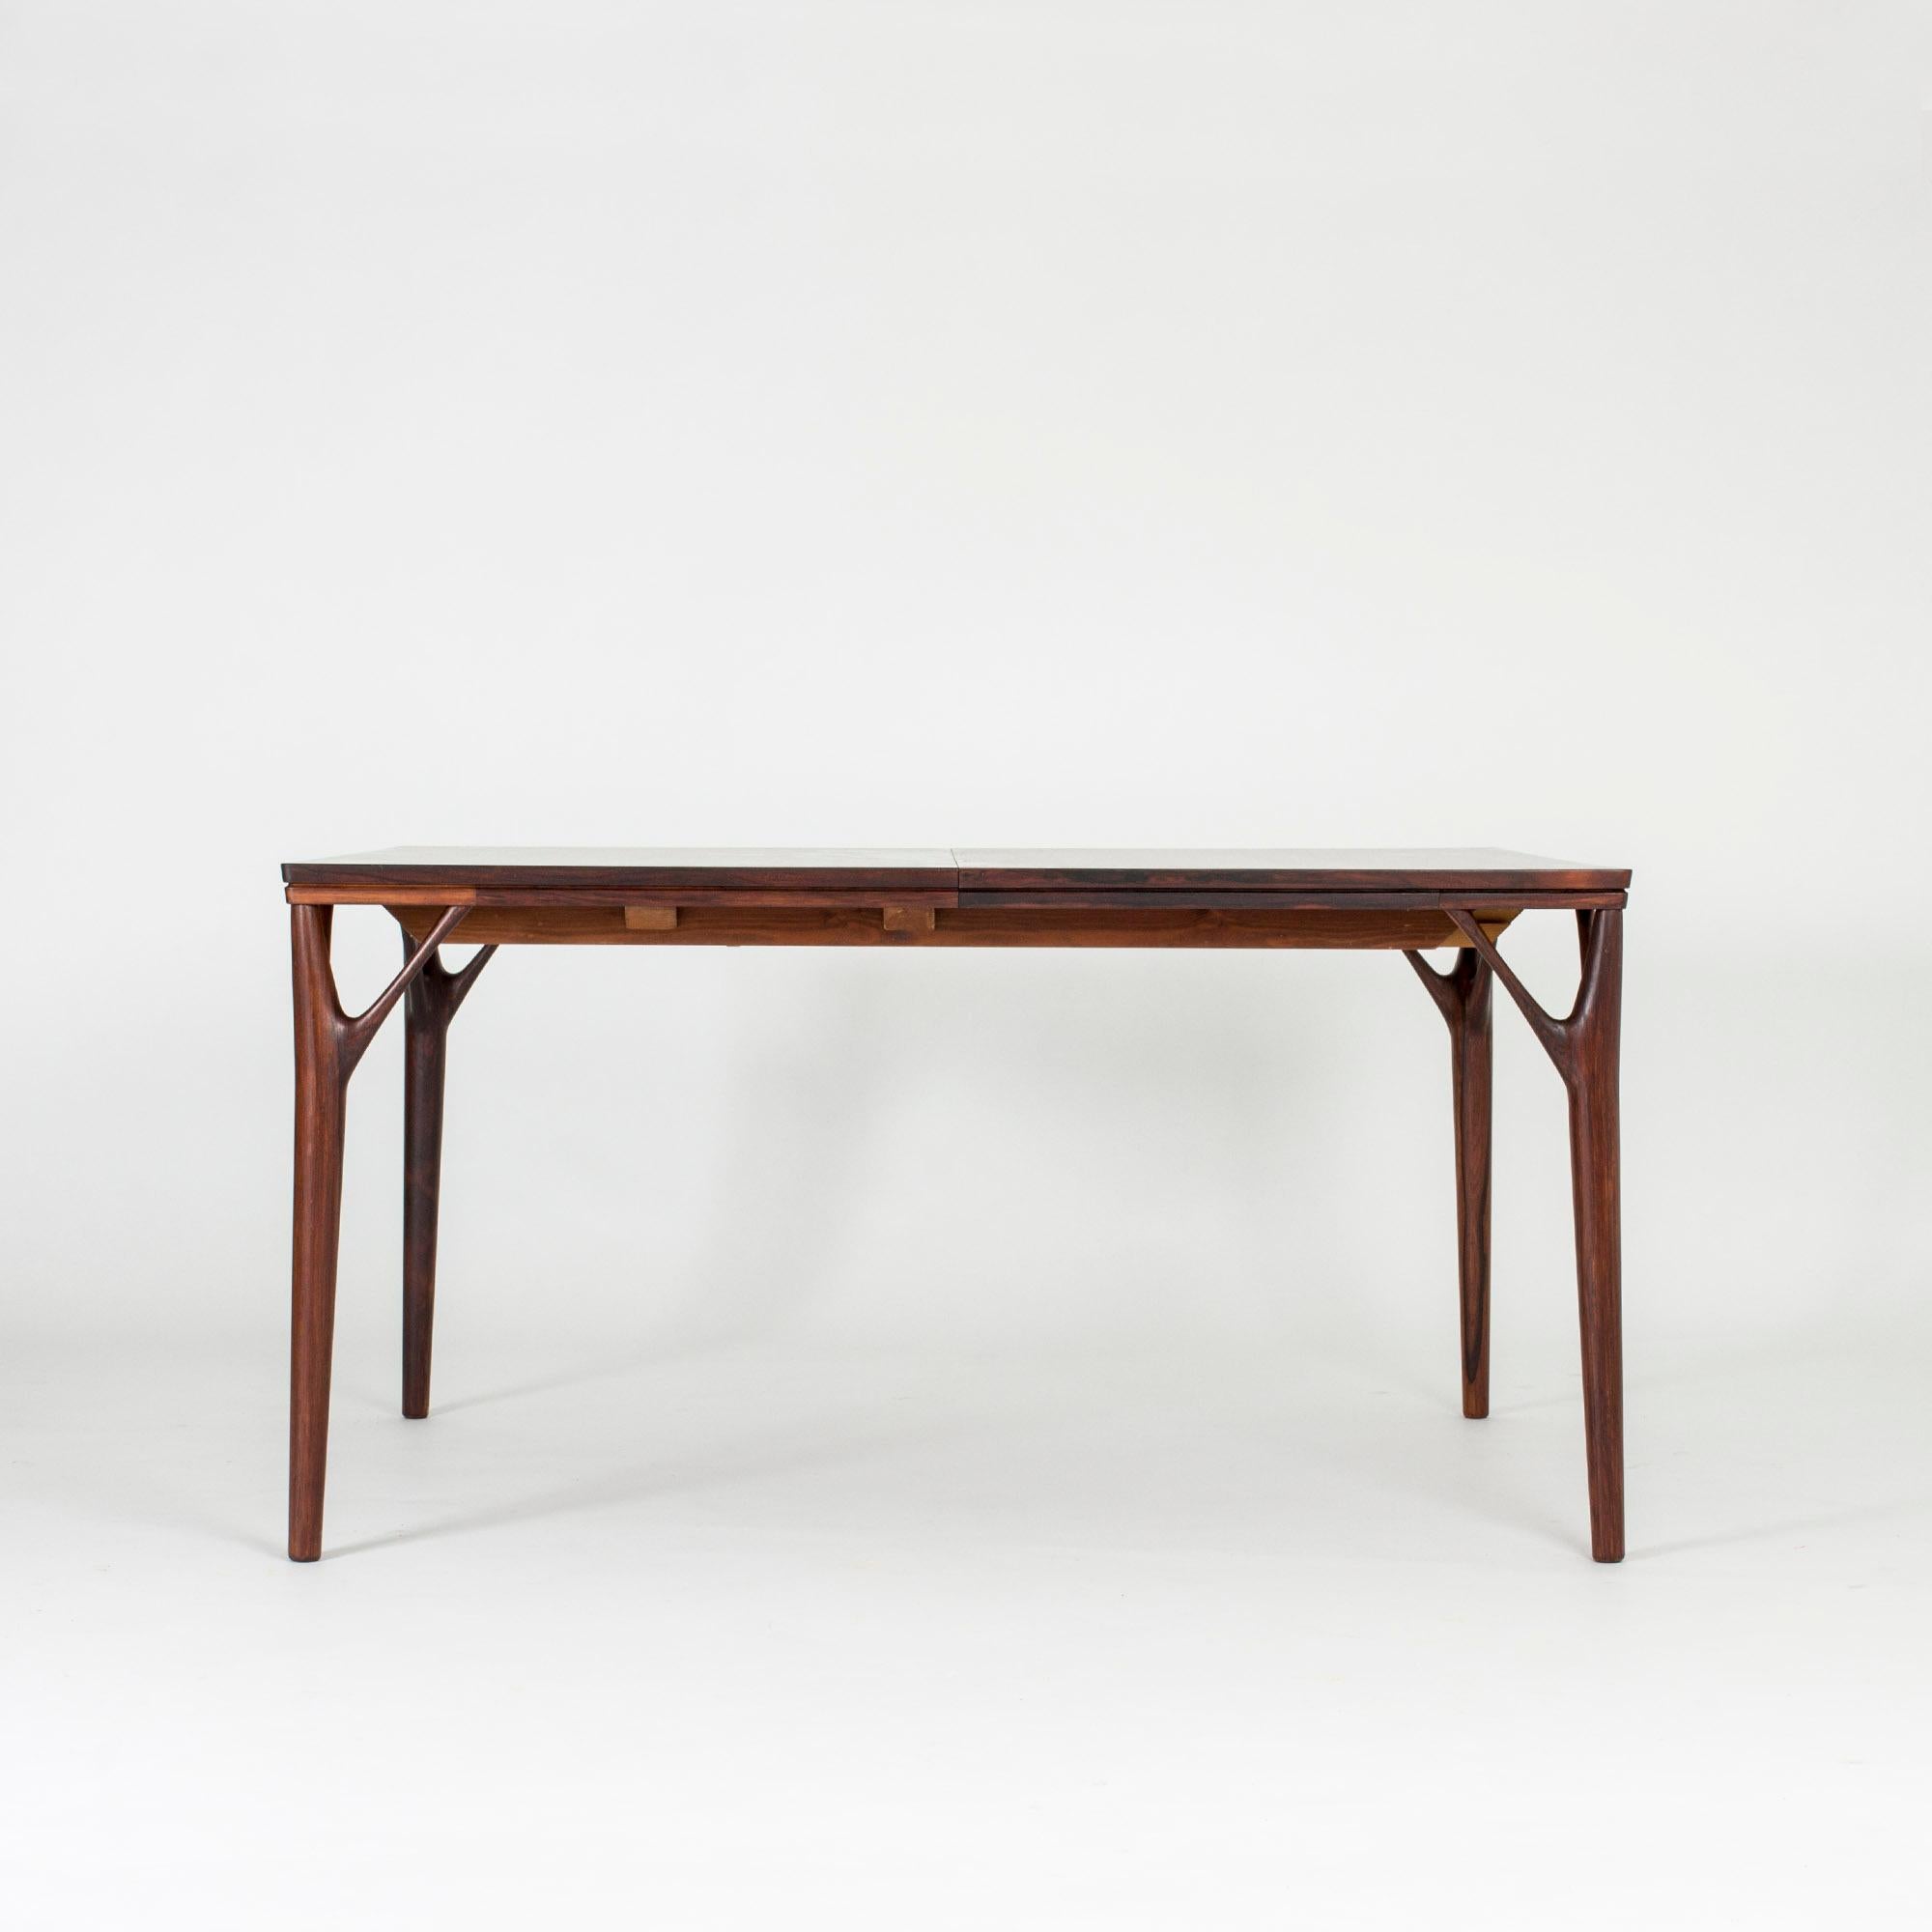 Stunning dining table by Helge Vestergaard Jensen, made from rosewood with an extension leaf ingeniously and practically hidden inside the tabletop. Beautiful leg joinery in the shape of branches, smoothly sculpted.